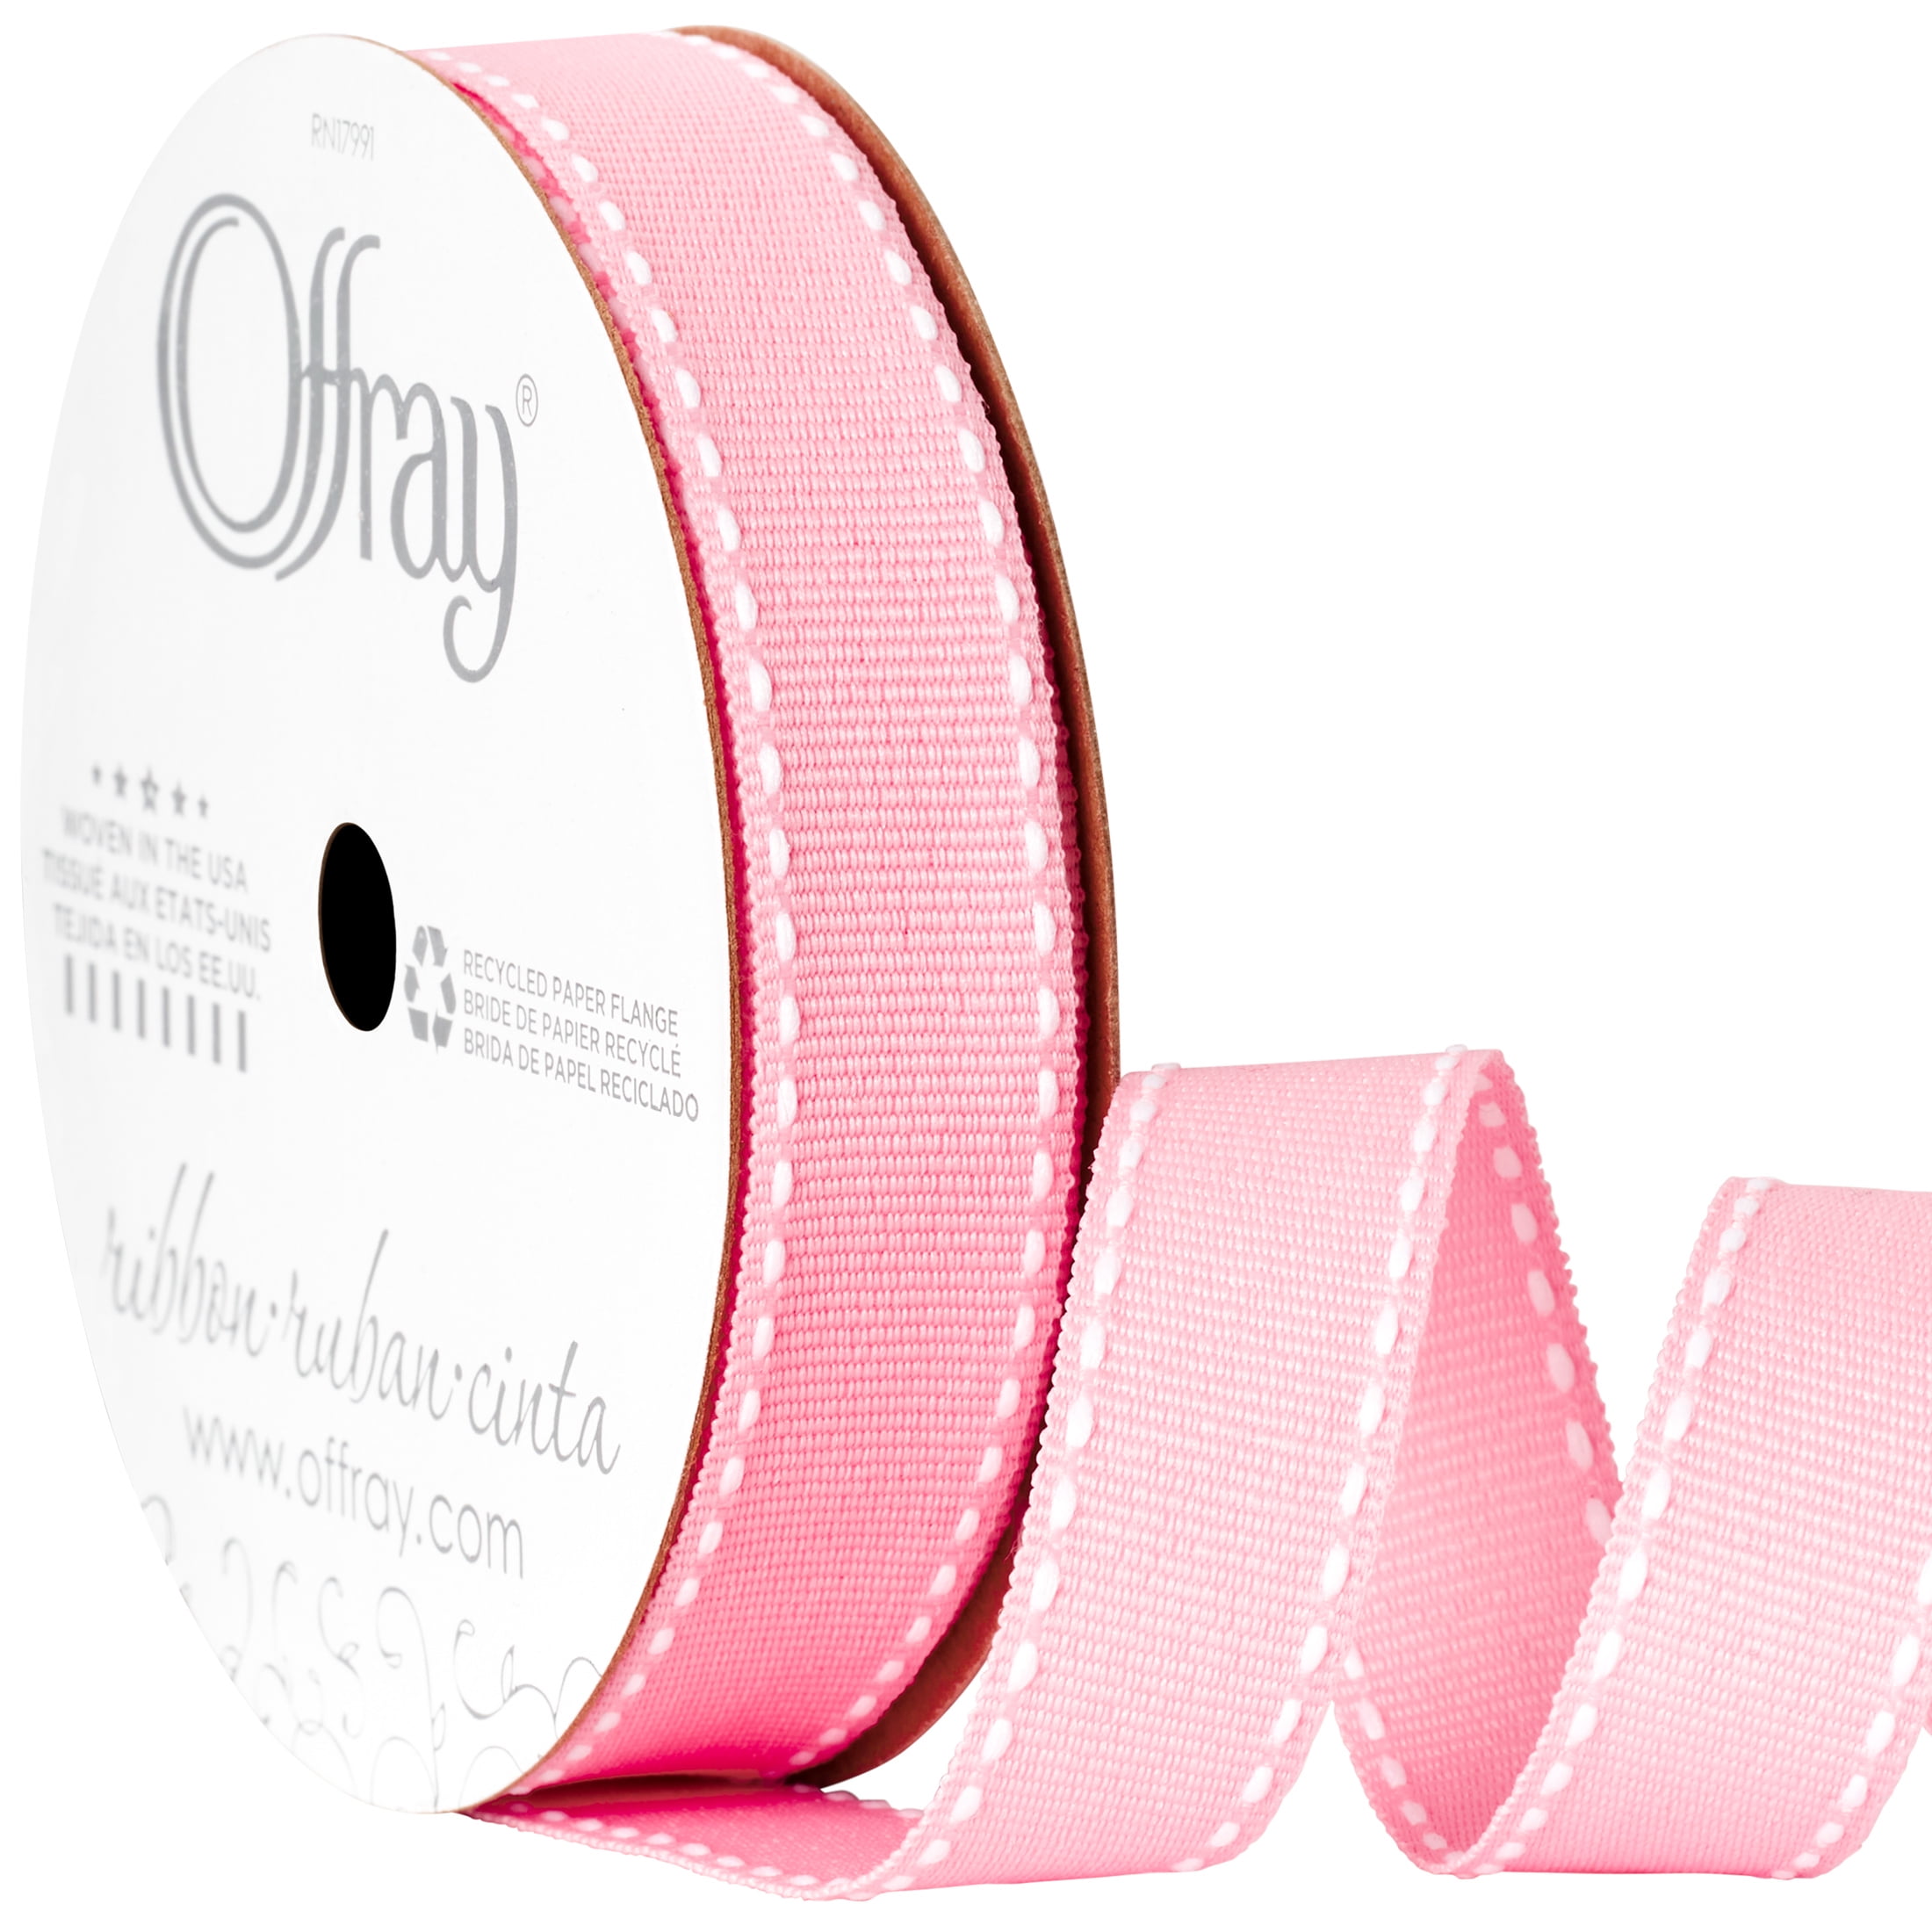 Offray 7/8 x 9' Striped Hot Pink & Lime Grosgrain Ribbon